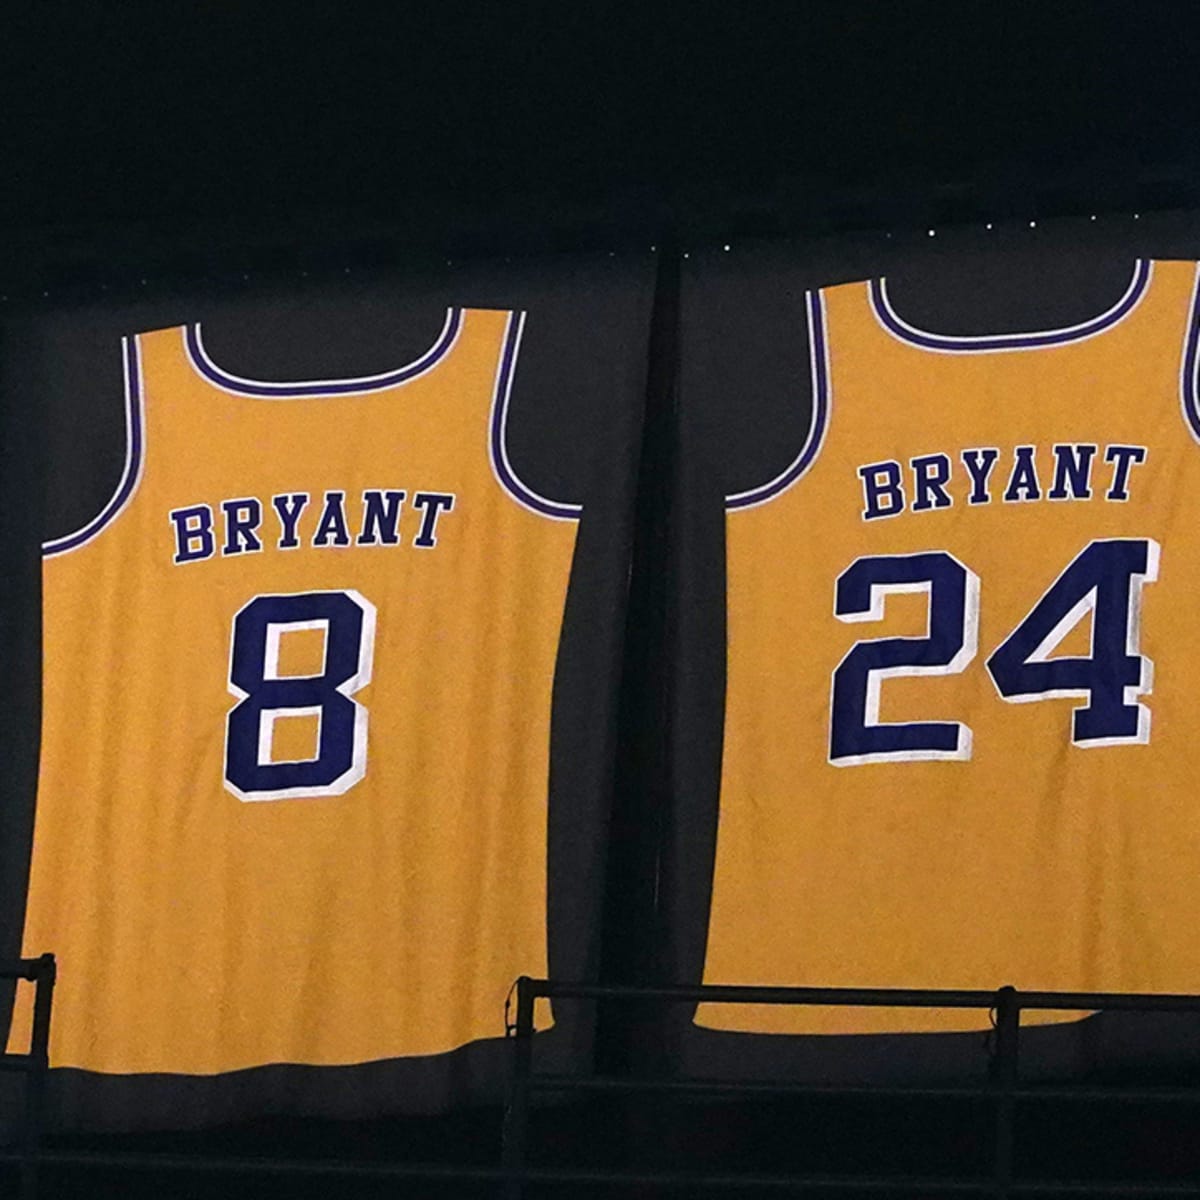 Kobe Bryant rookie jersey sells for record $3.69 million - Los